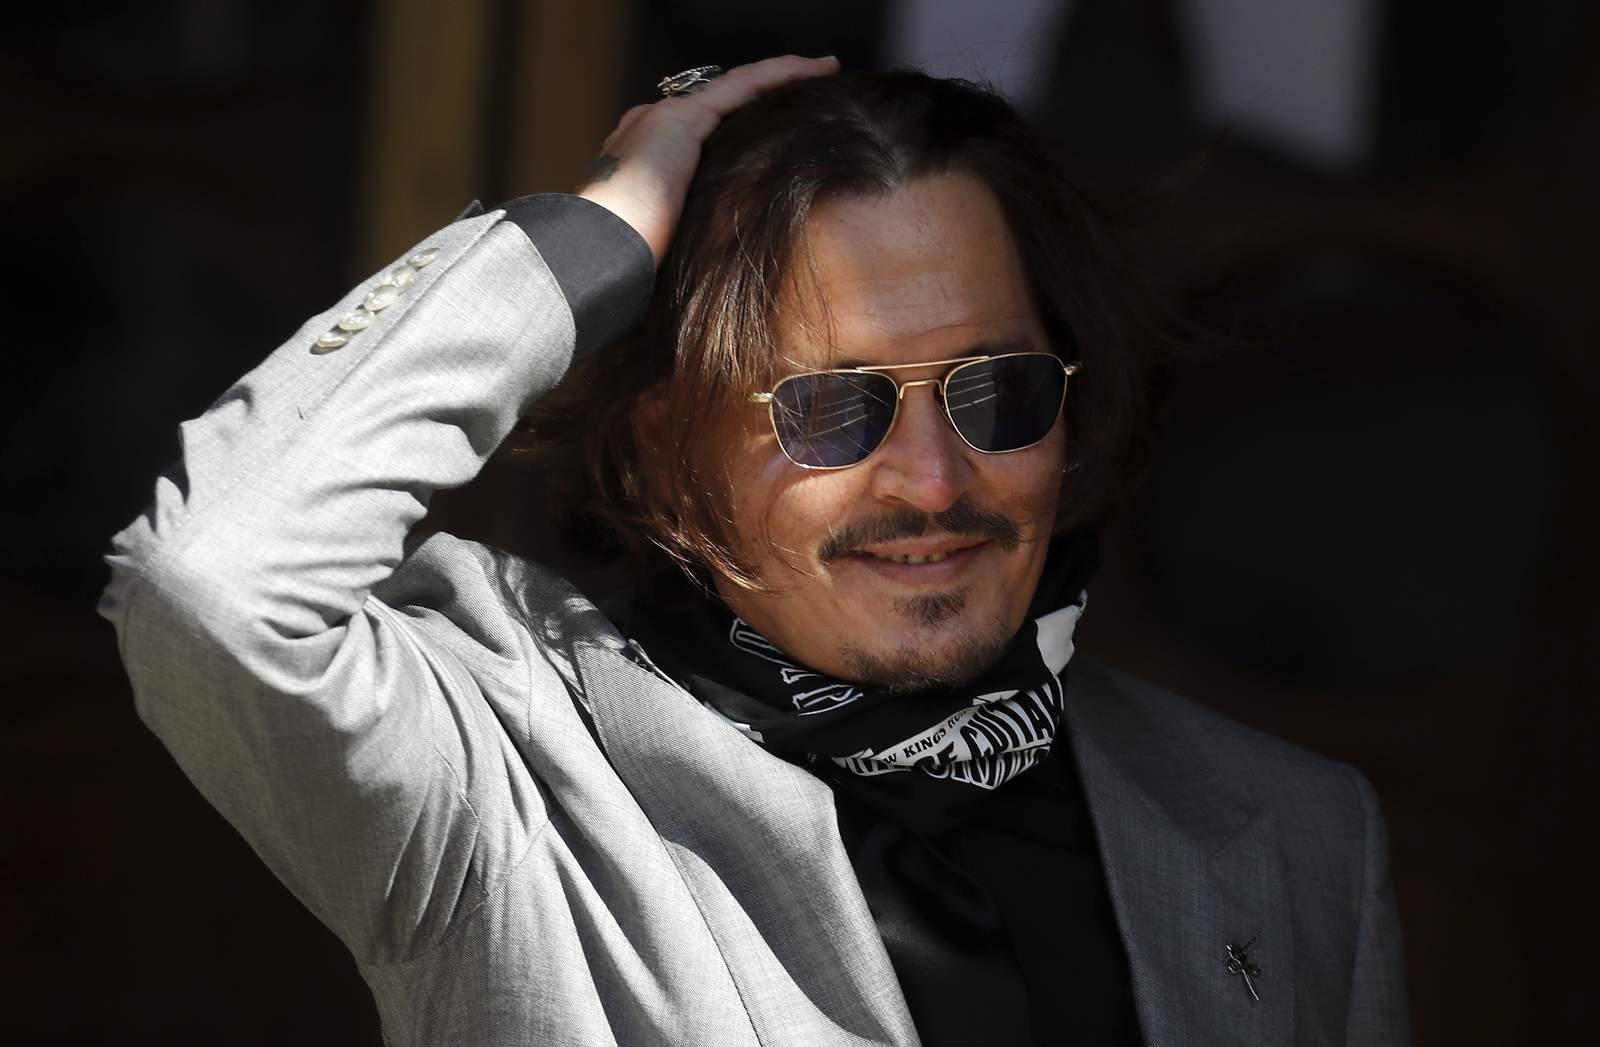 Johnny Depp loses UK libel case over 'wife-beater' claims